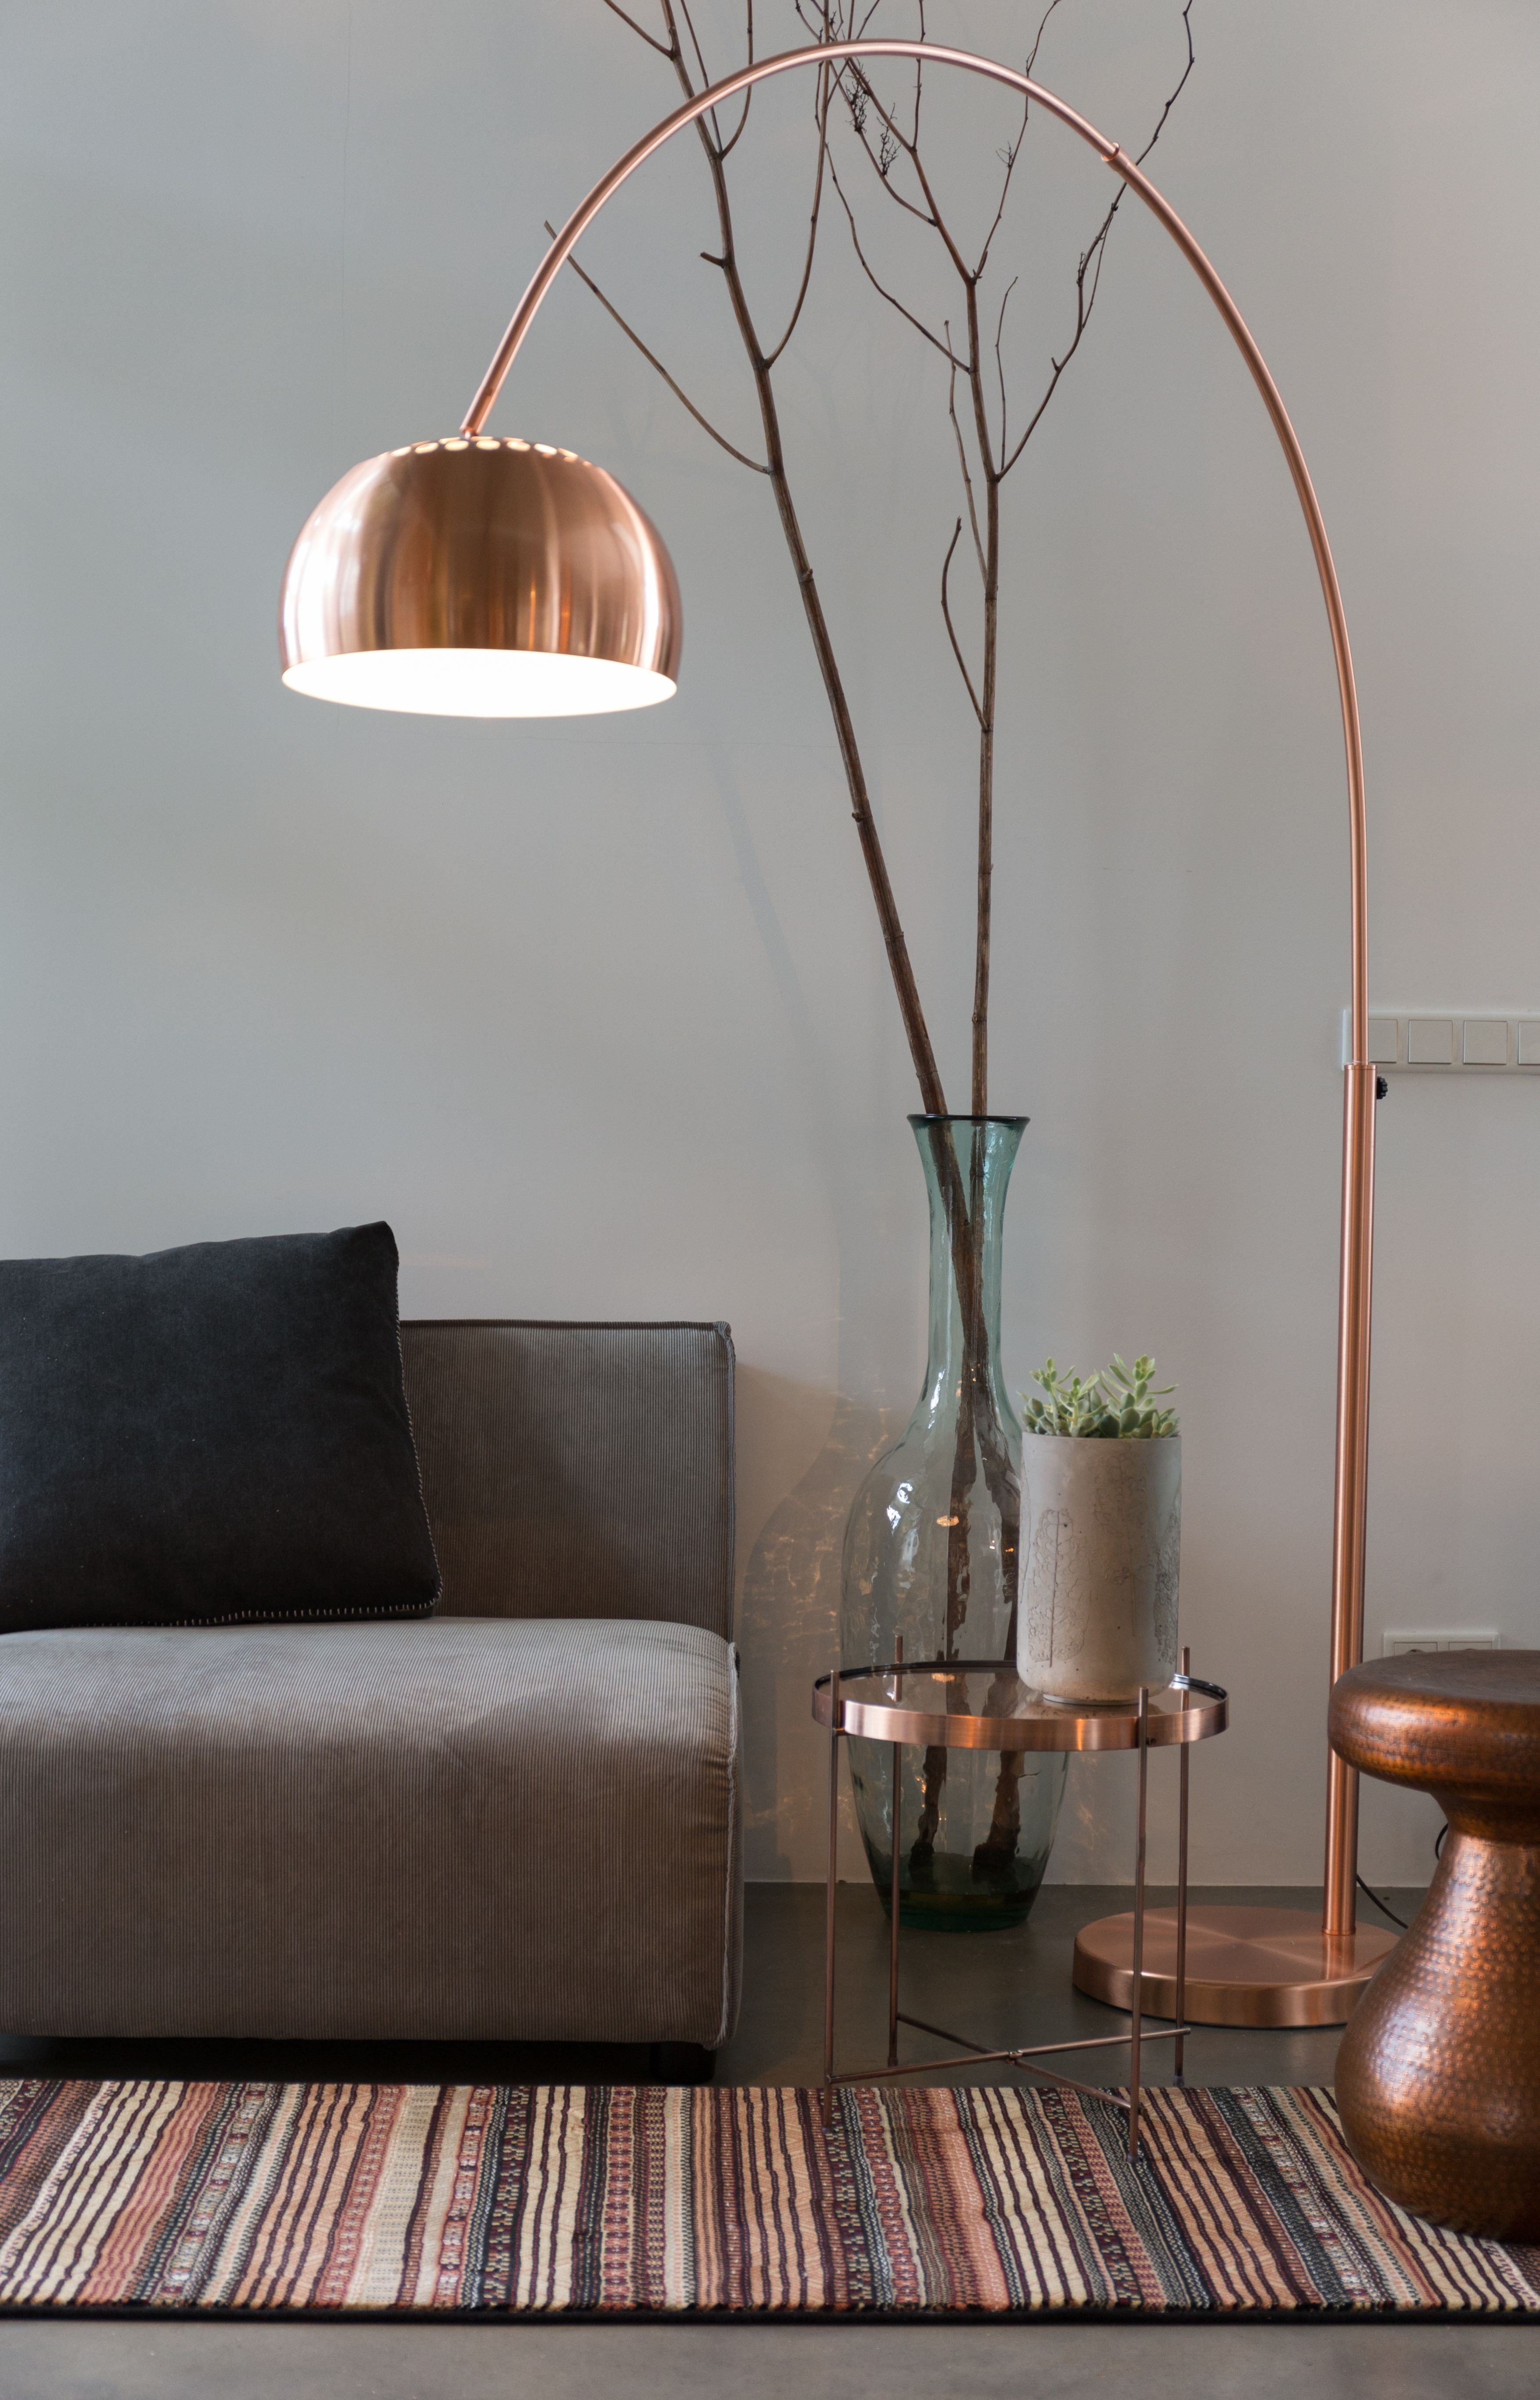 23 Ways To Decorate With Copper Modern Floor Lamps Arc regarding size 3508 X 5466